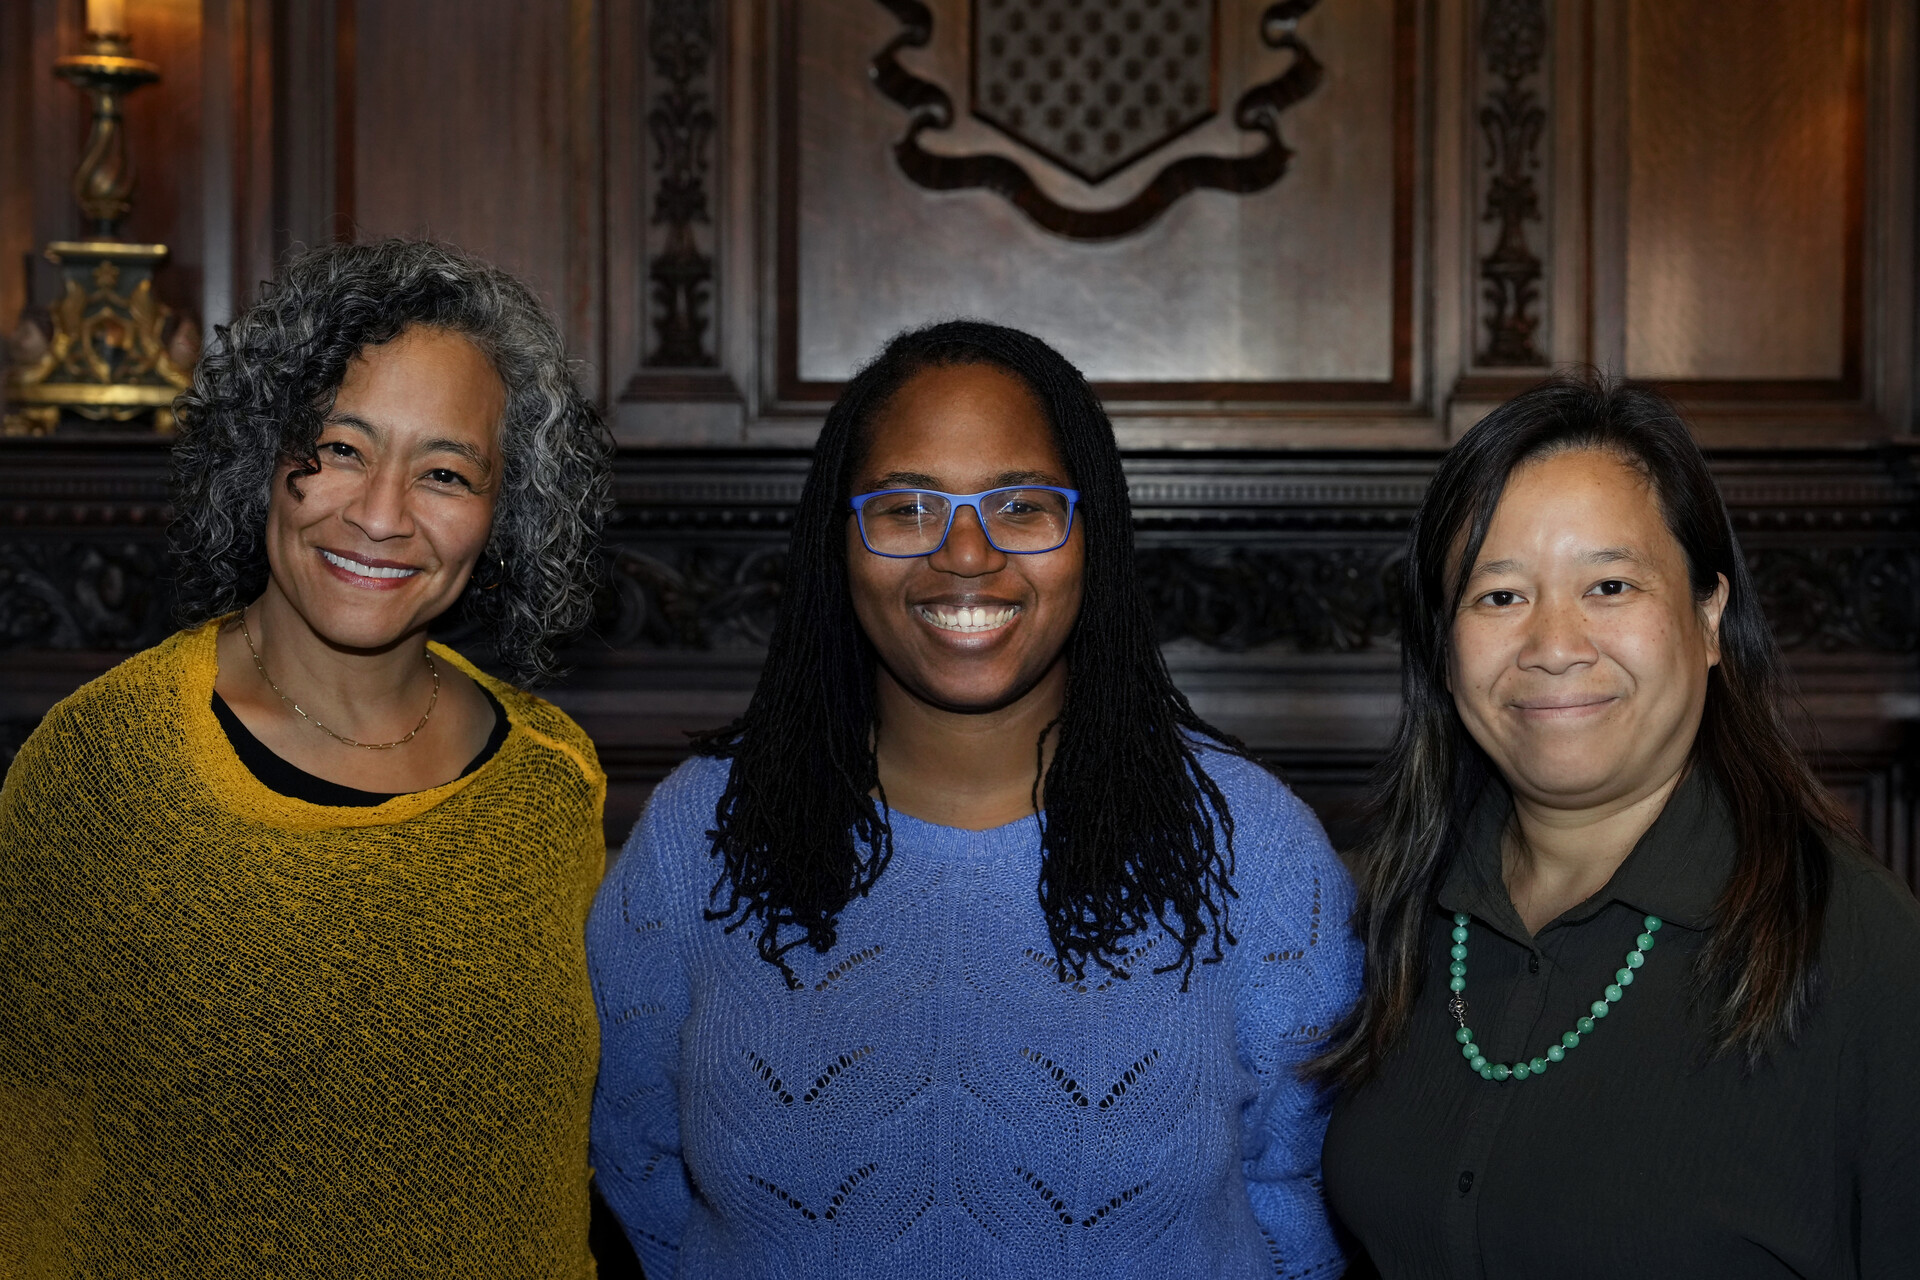 President L. Song Richardson, newly-tenured faculty member Jessica Kisunzu, and Dean Emily Chan at a celebratory dinner on April 11 at Stewart House.  Photo by Jamie Cotten / Colorado College